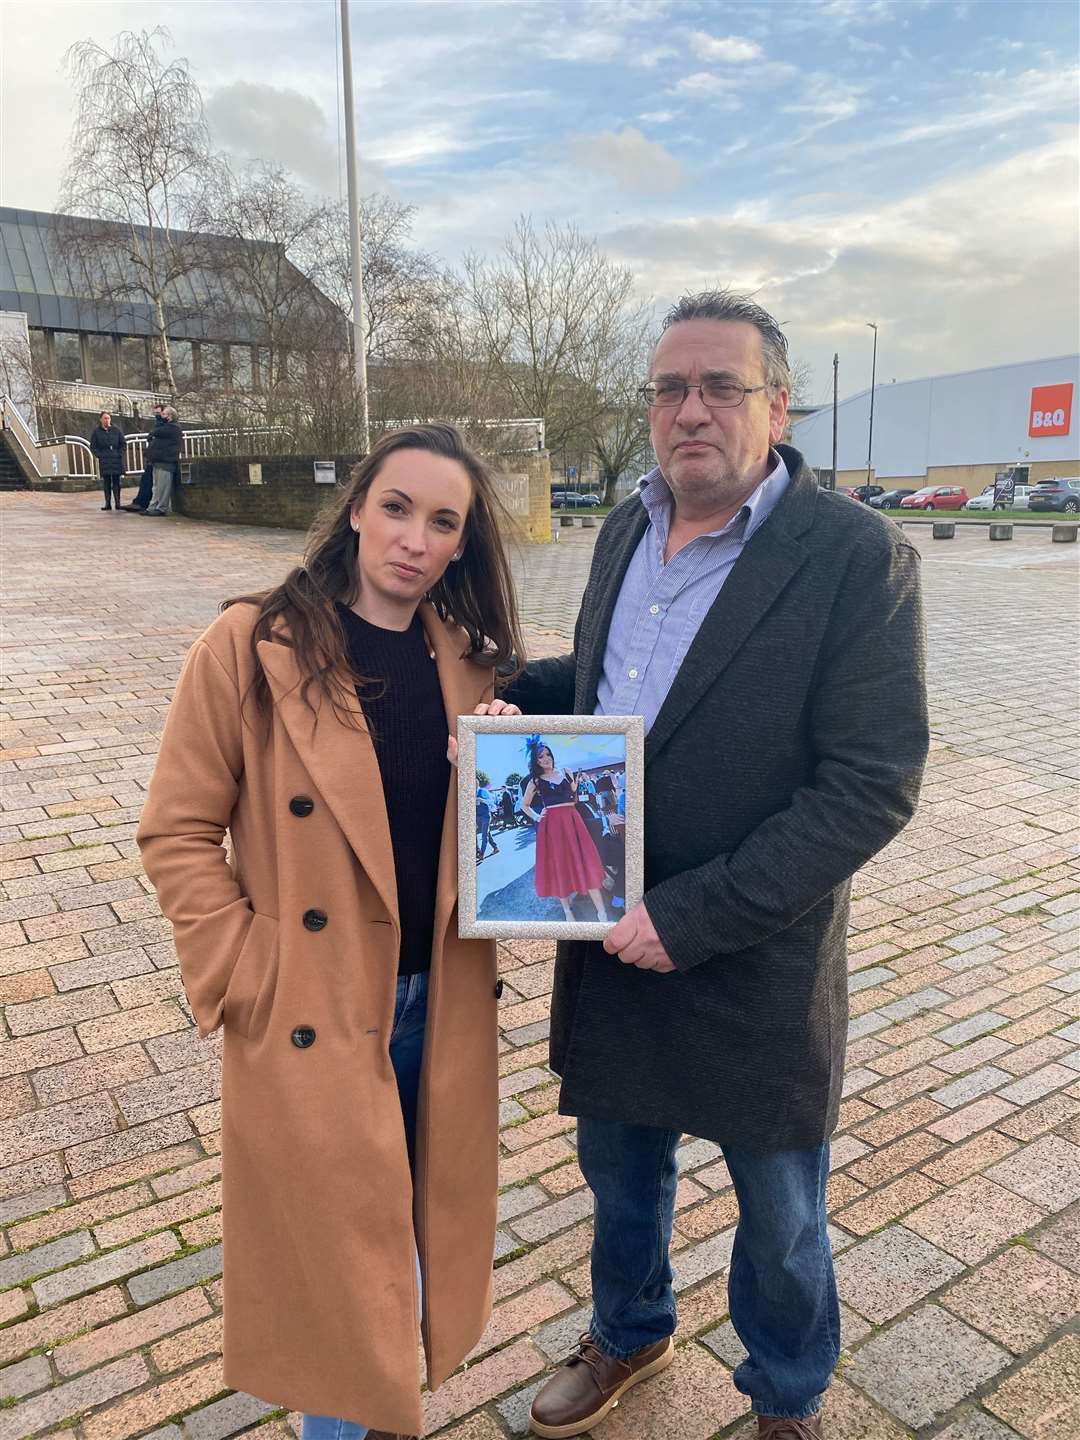 Gemma Robinson's sister Kirsty Robinson and her dad Tony Robinson with a photo of her outside Maidstone Crown Court following Falconer's sentencing in February which they said was not justice for Gemma